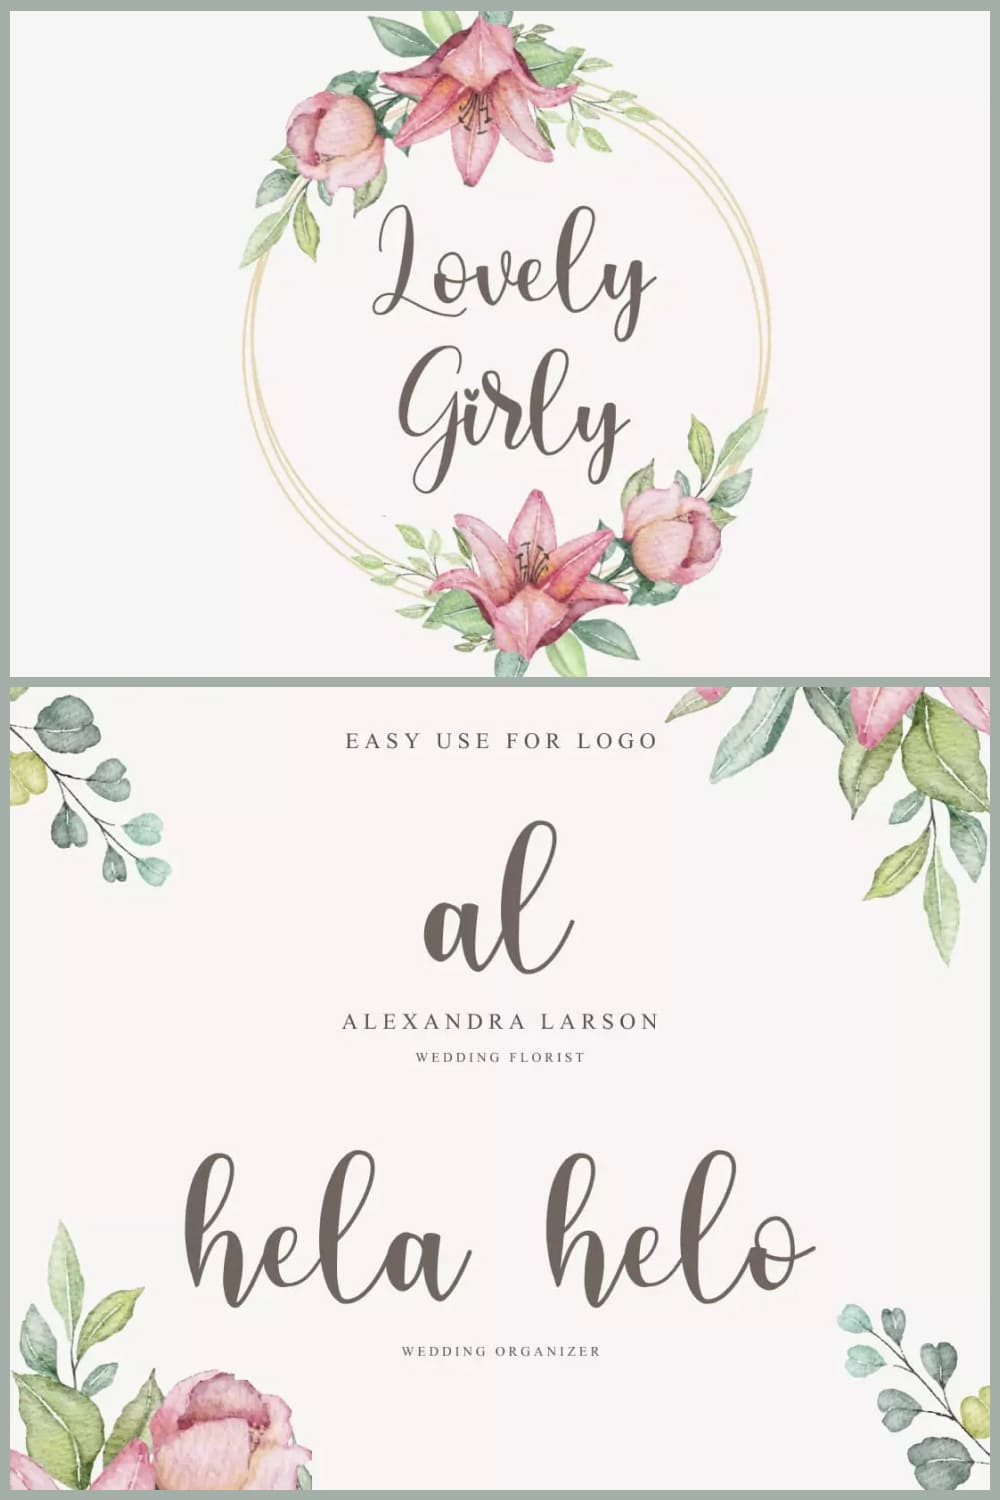 Beautiful elegant text in a delicate floral frame.